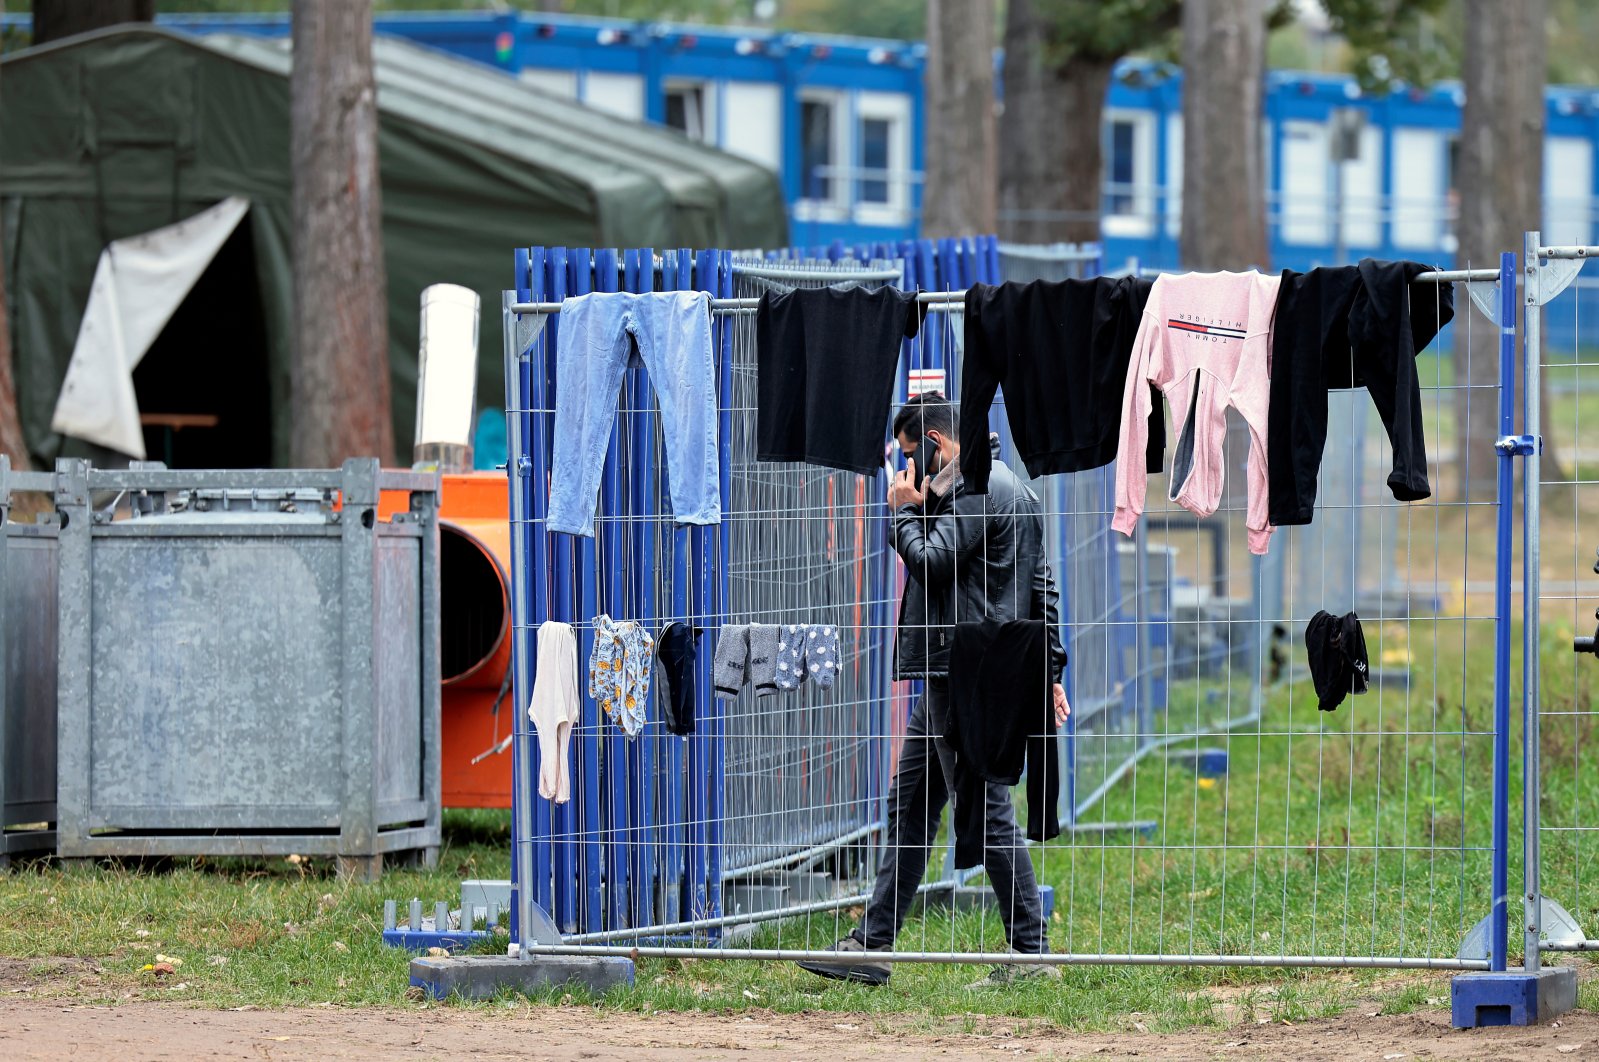 A migrant uses his smartphone in a coronavirus quarantine area at a camp in Eisenhuettenstadt, Germany, Oct. 14, 2021. (Reuters Photo)